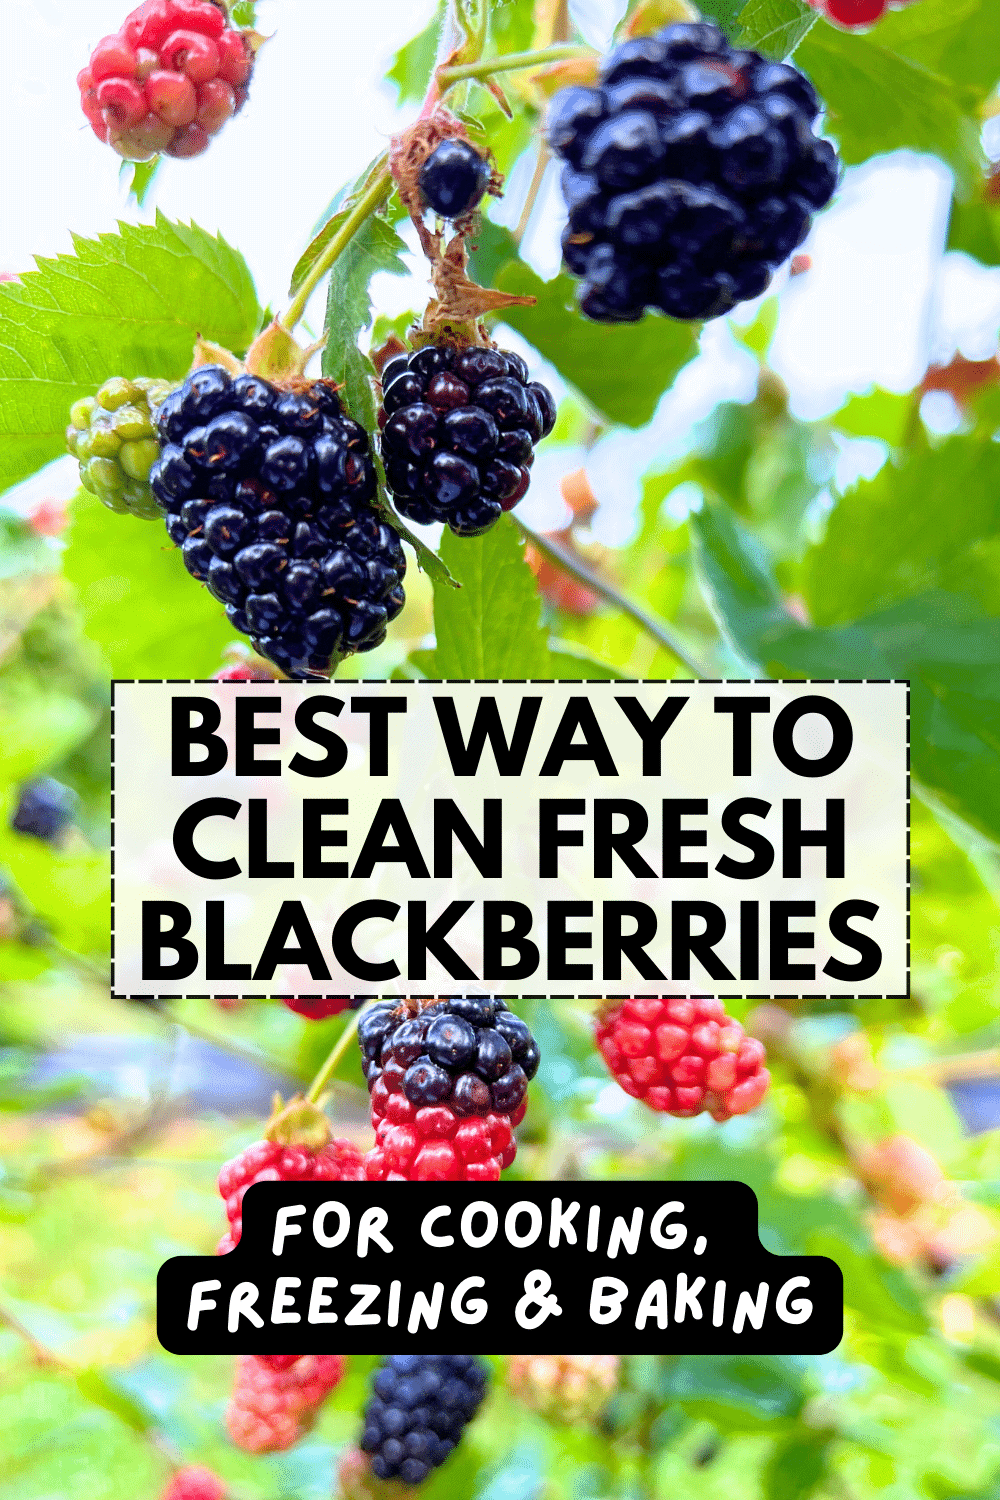 How To Clean Fresh Blackberries For Baking And Freezing - Text over fresh blackberry bush with ripe and unripe blackberries on bush